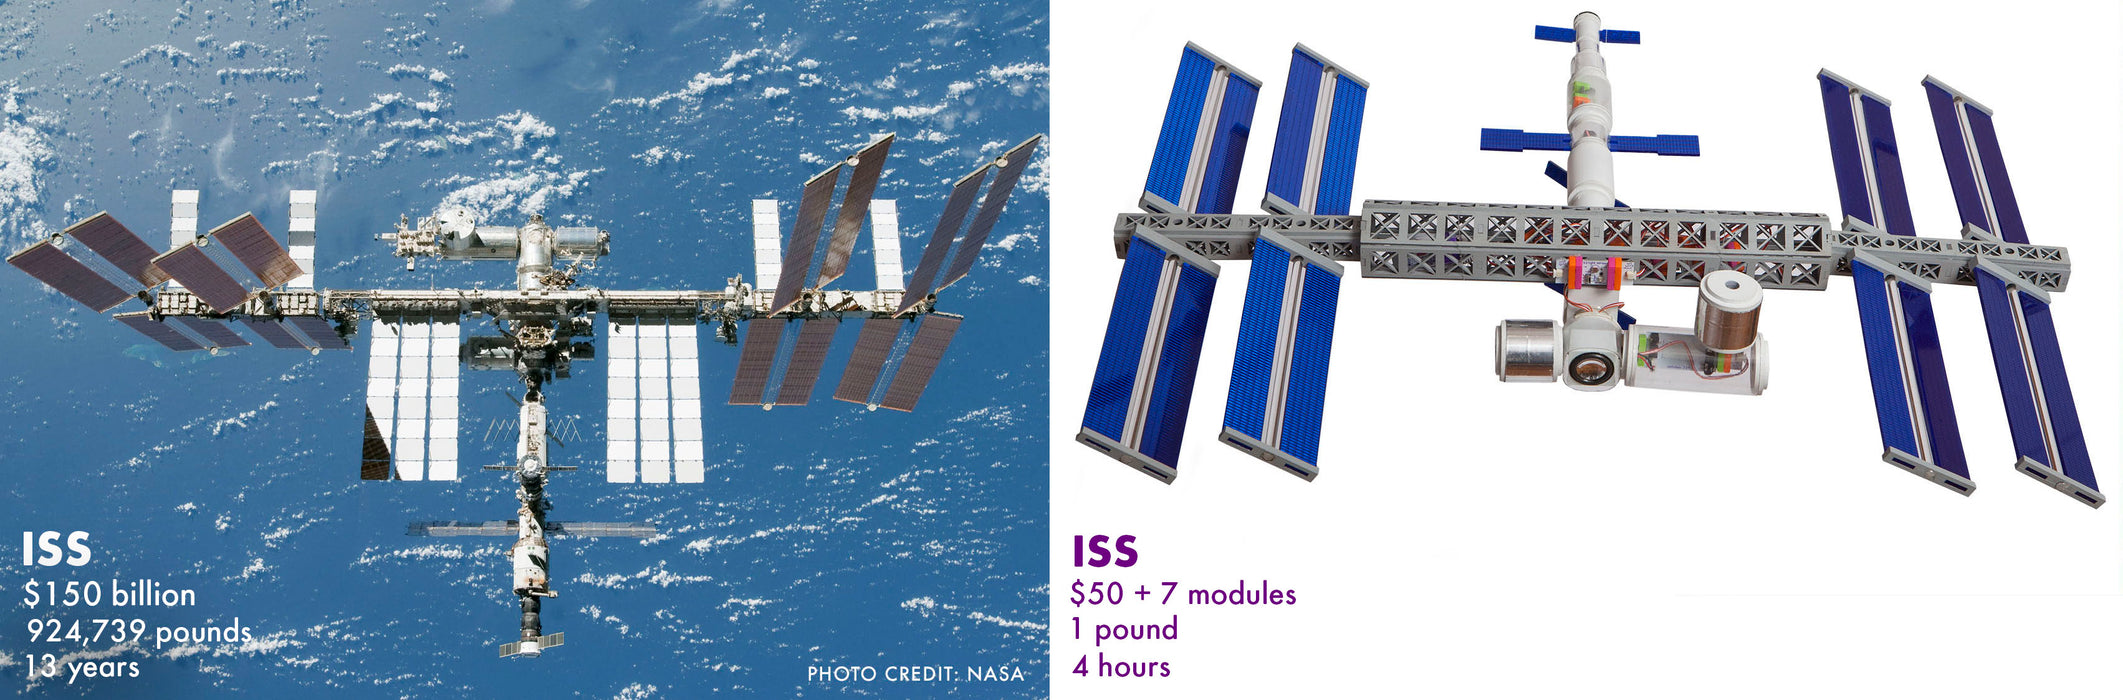 littleBits Space Station (Actual ISS not included)